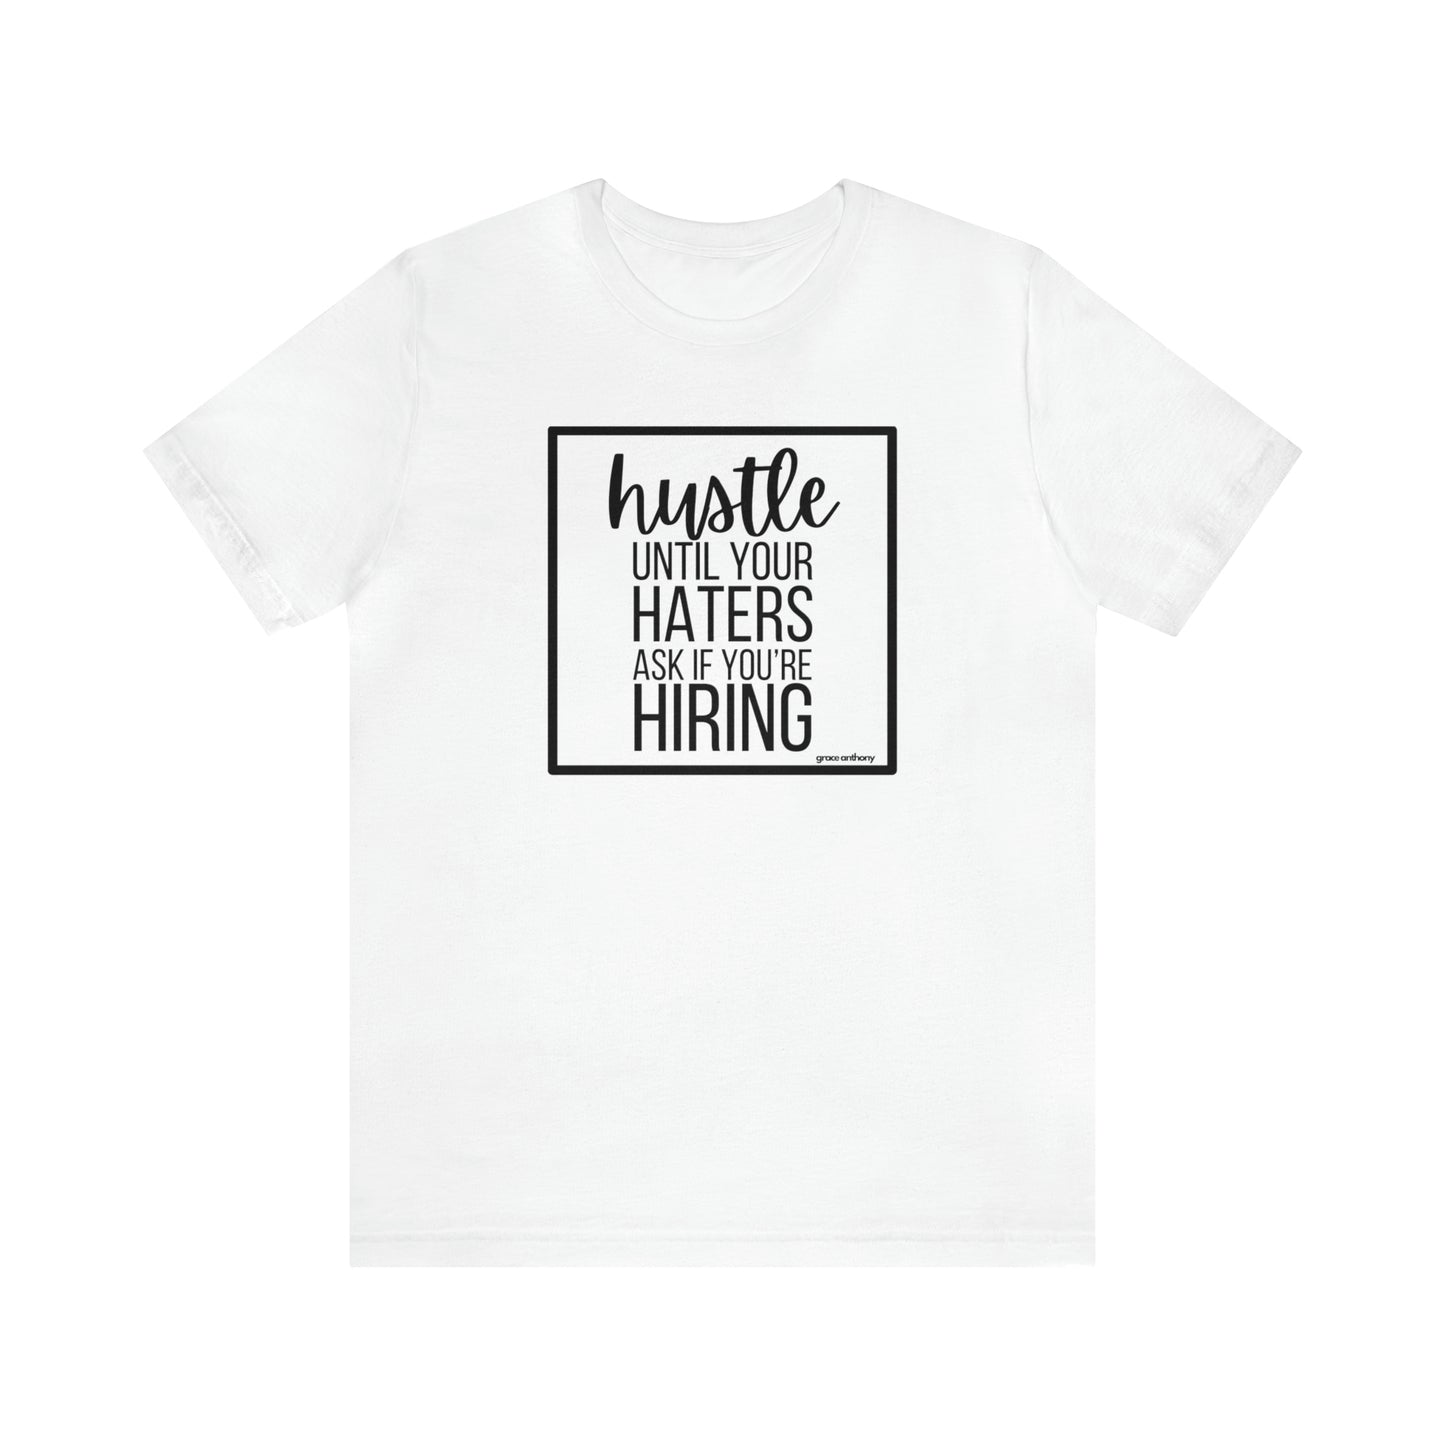 Hustle Until Your Haters Ask if You Are Hiring Shirt, Motivational Shirt, Working Mom Shirt, Small Business T-Shirt, Gift for Business Owner